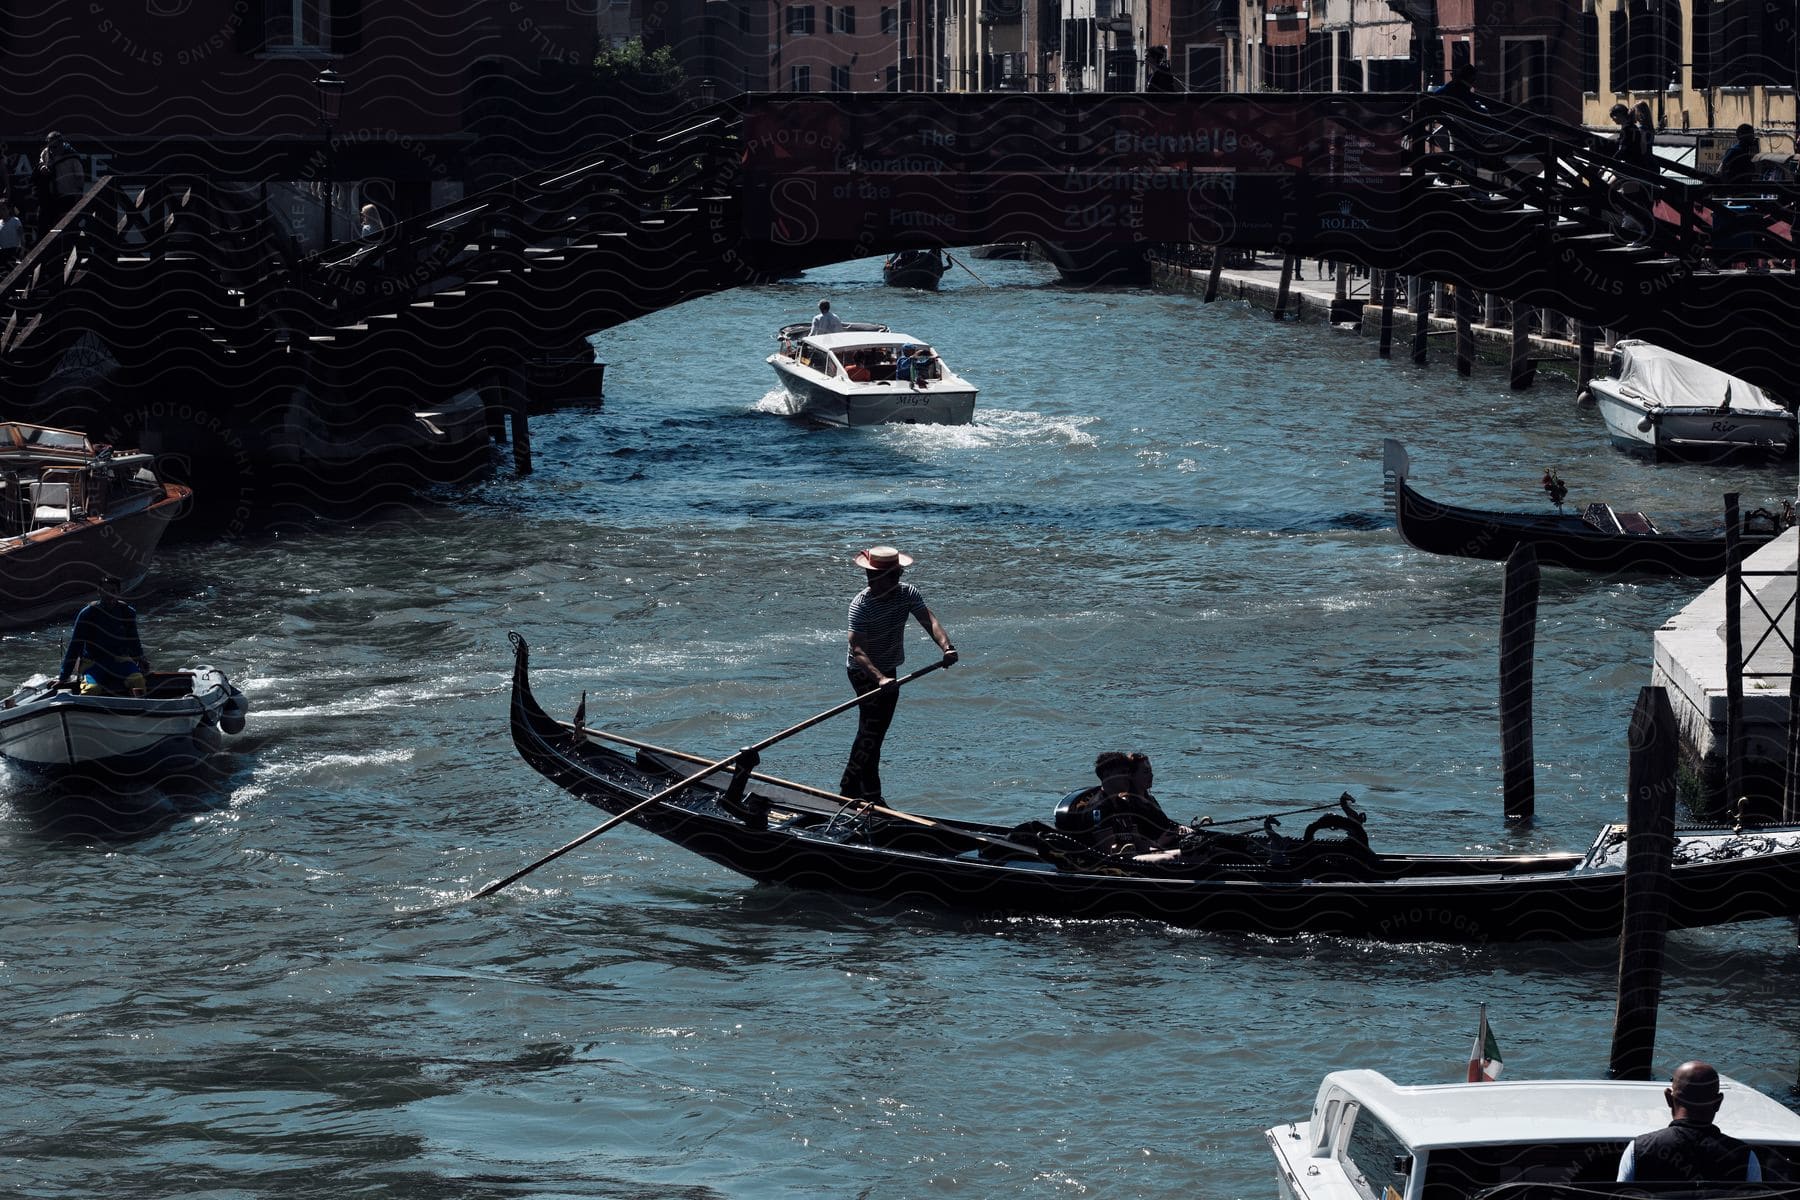 Stock photo of gondolier steering gondola in the river as motor-powered boats go by.